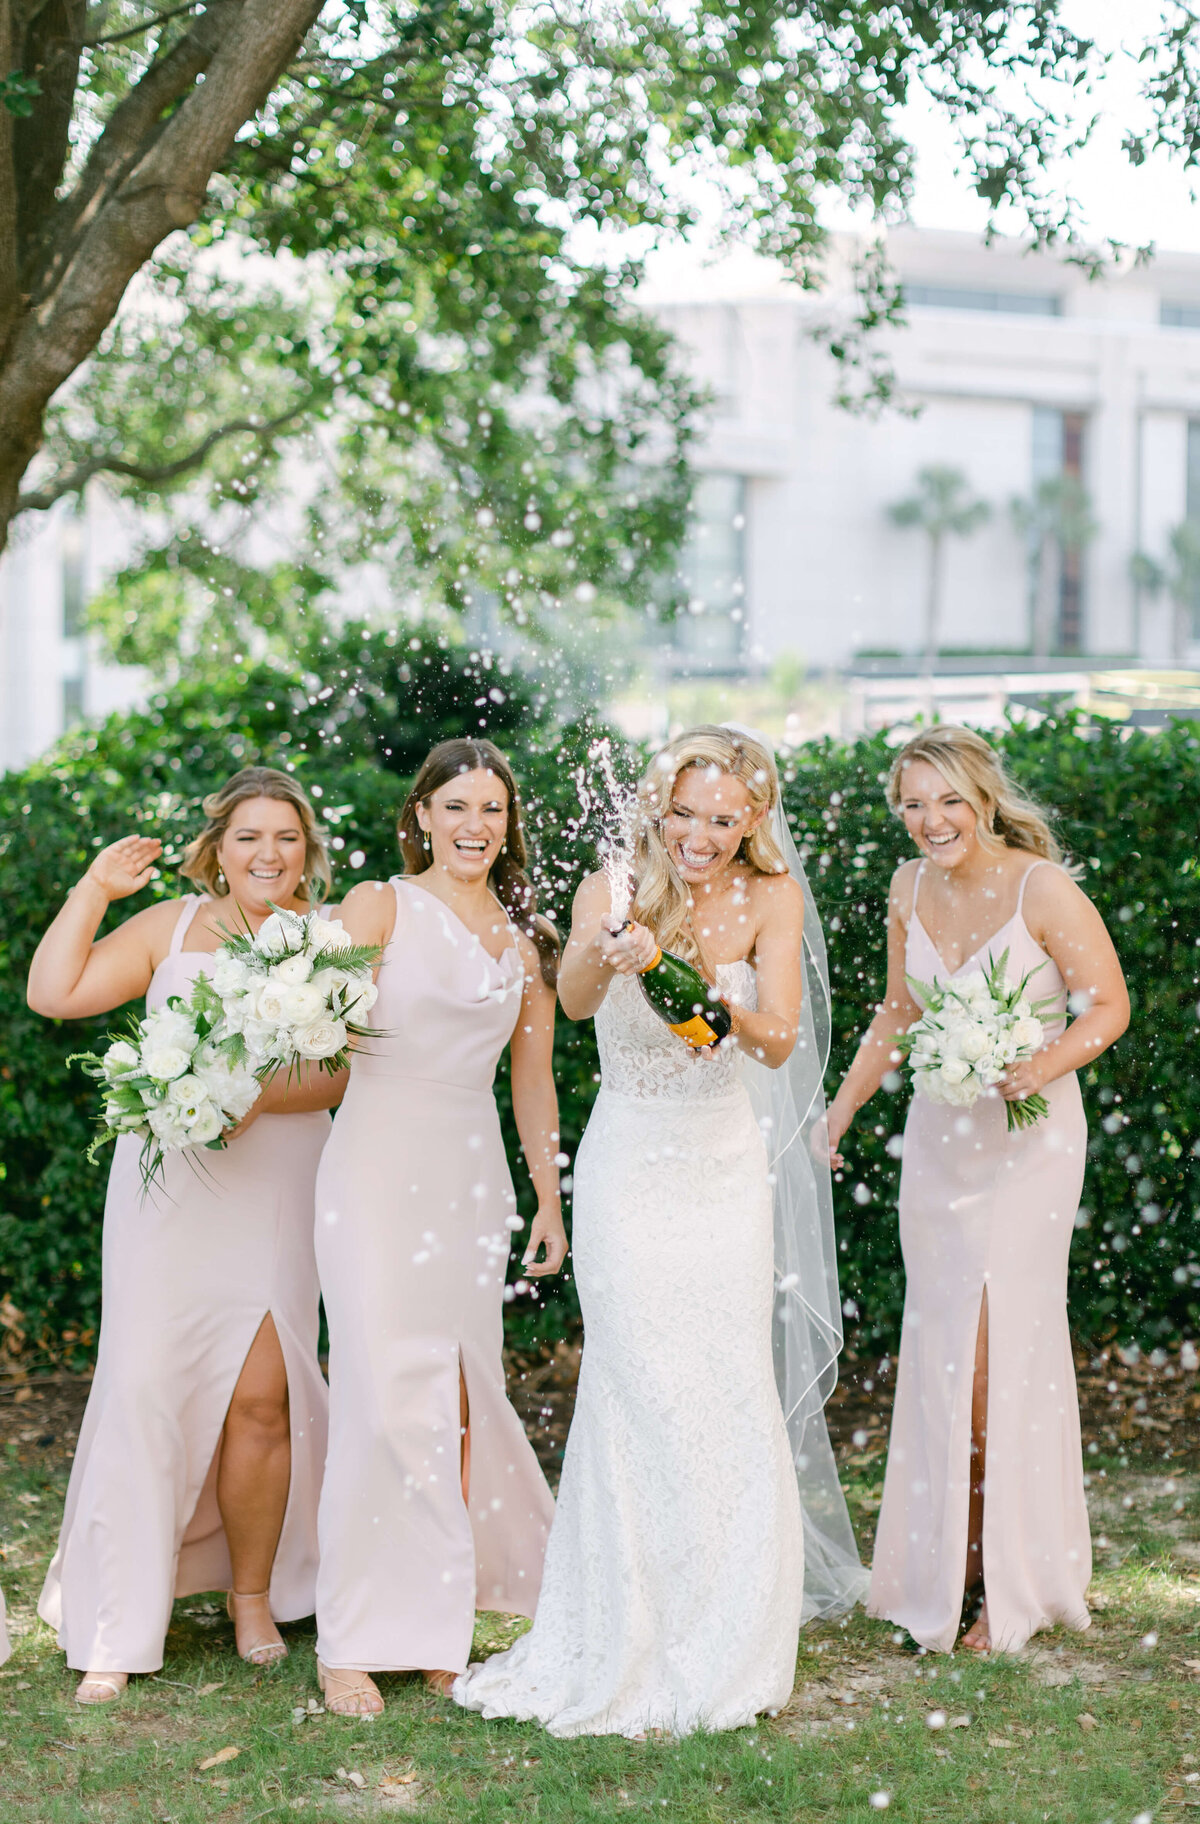 A bride pops champagne with her bridesmaids.